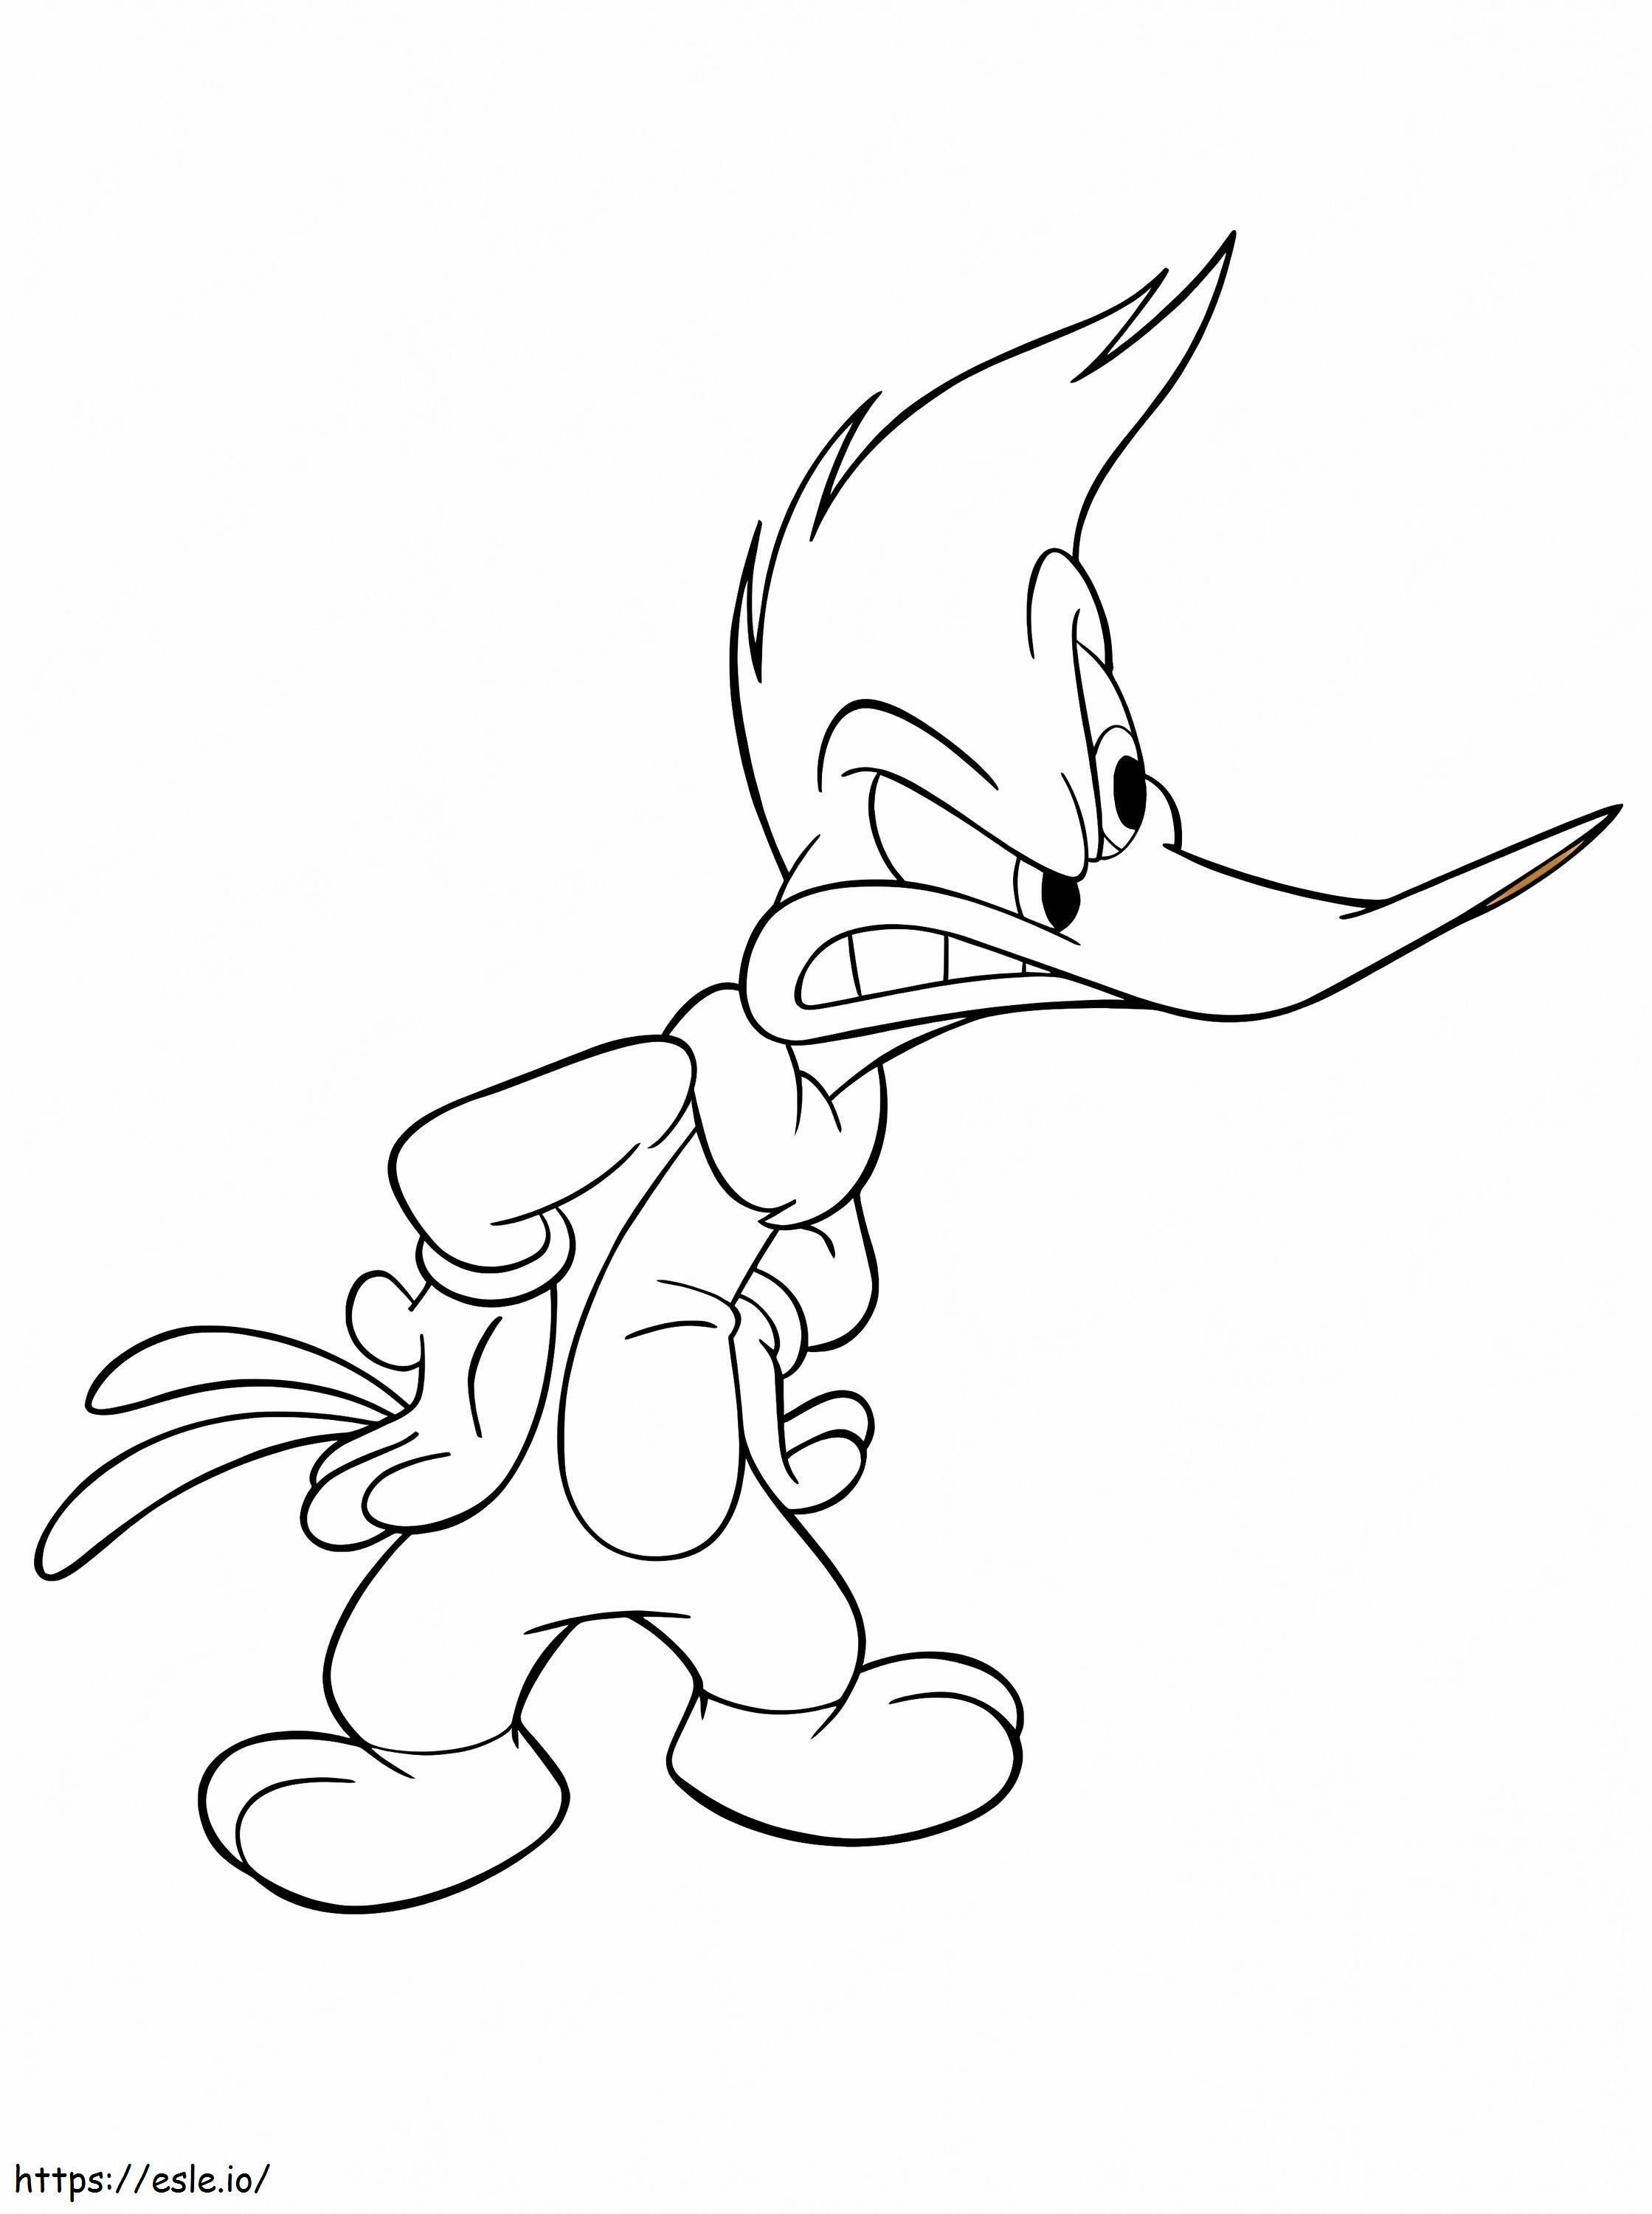 Angry Woody Woodpecker coloring page